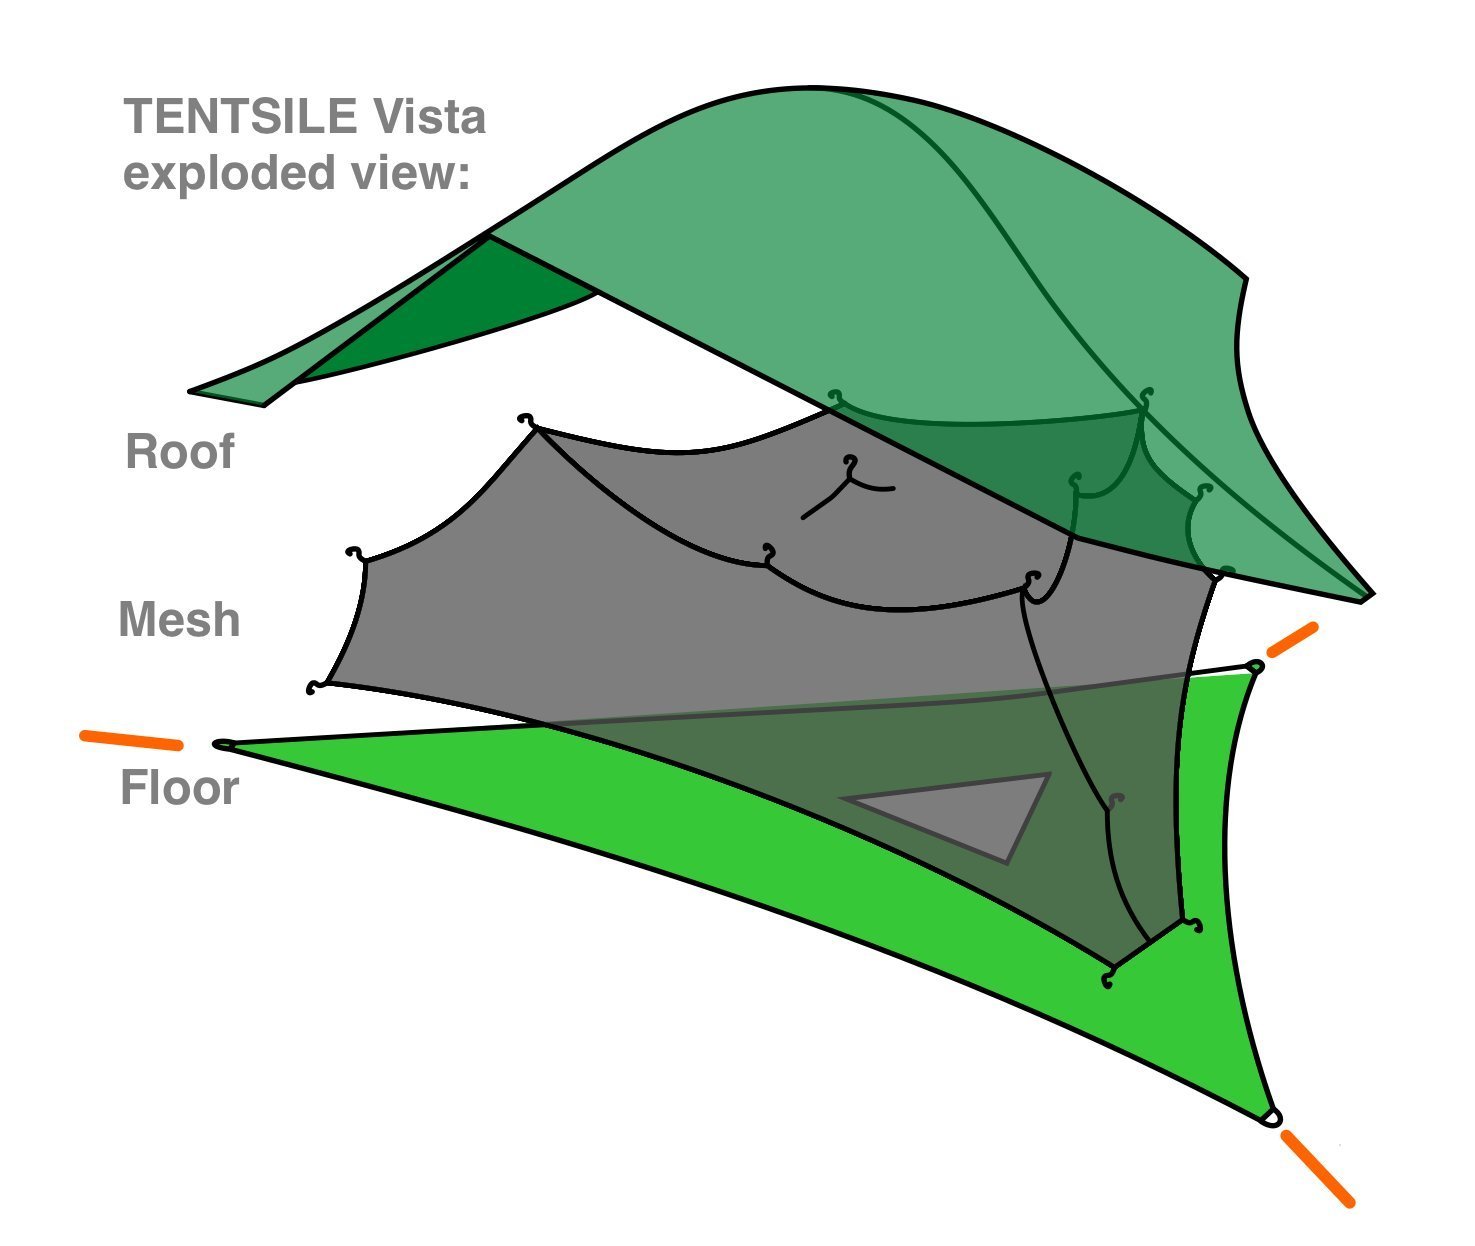 An exploded view of the tentsile vista